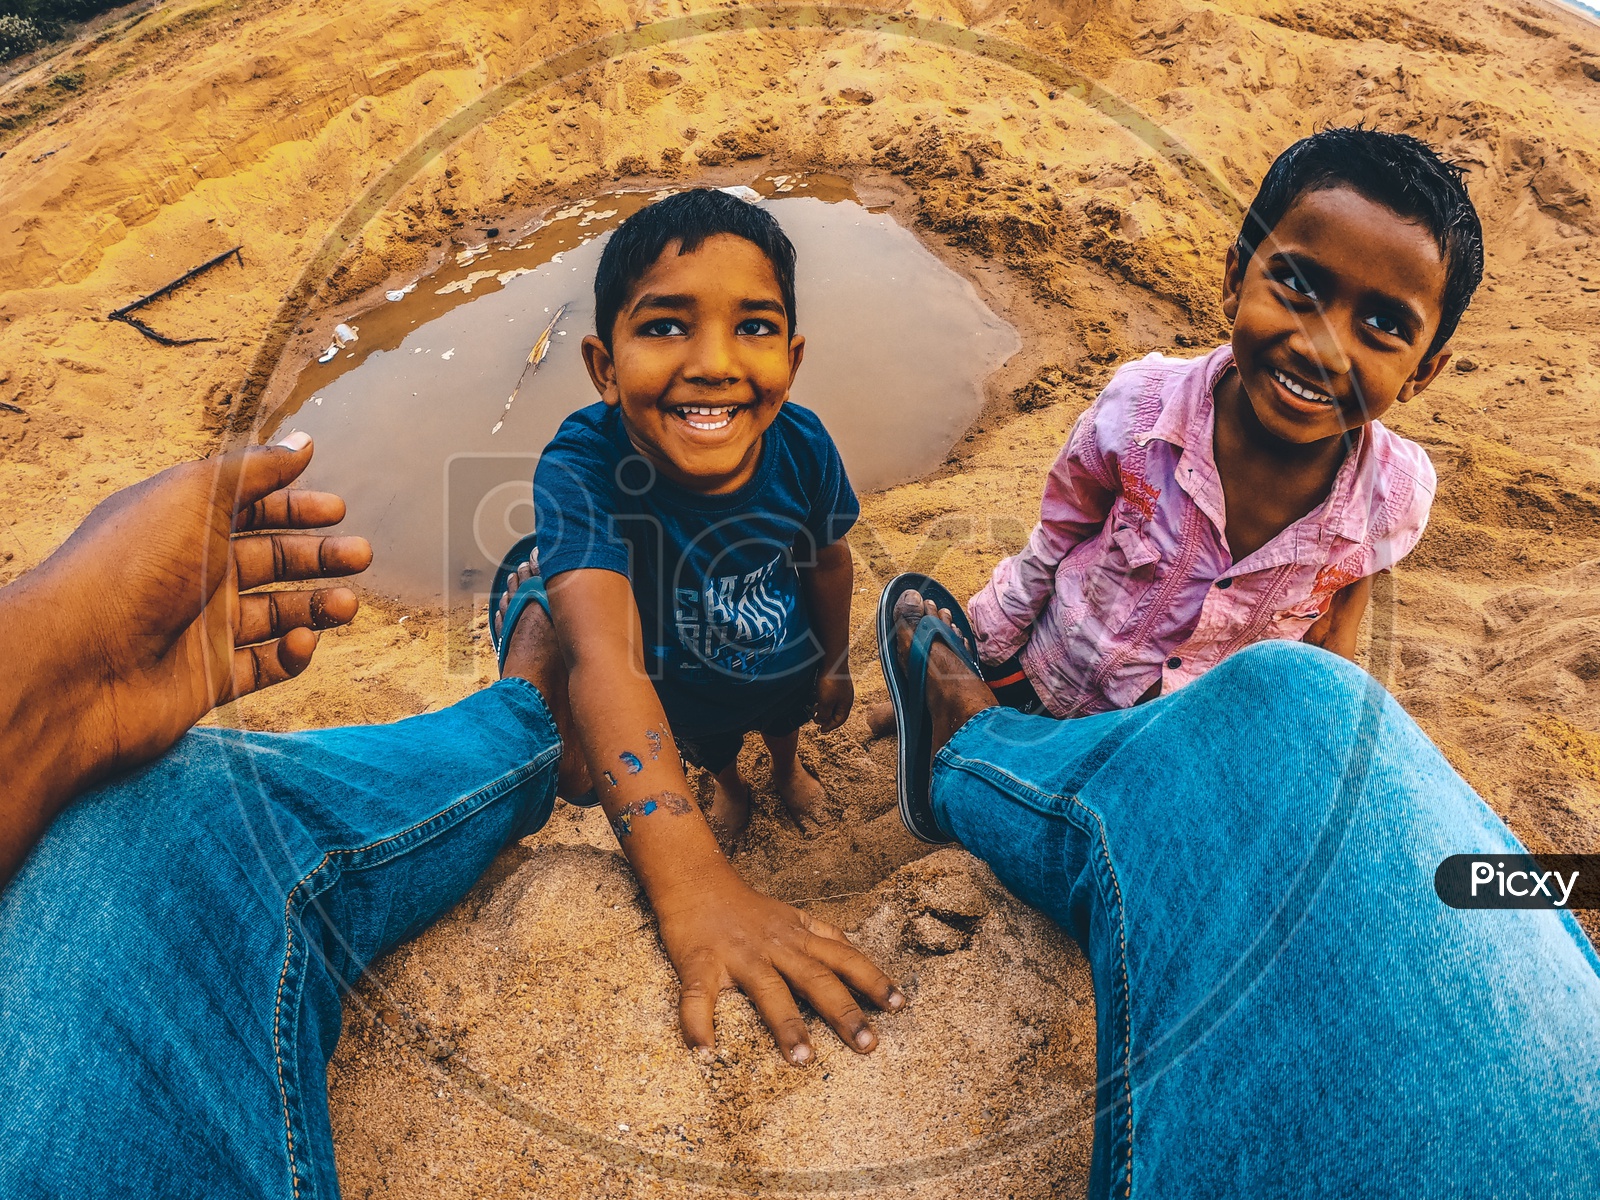 Indian rural kids smiling after playing in the sand